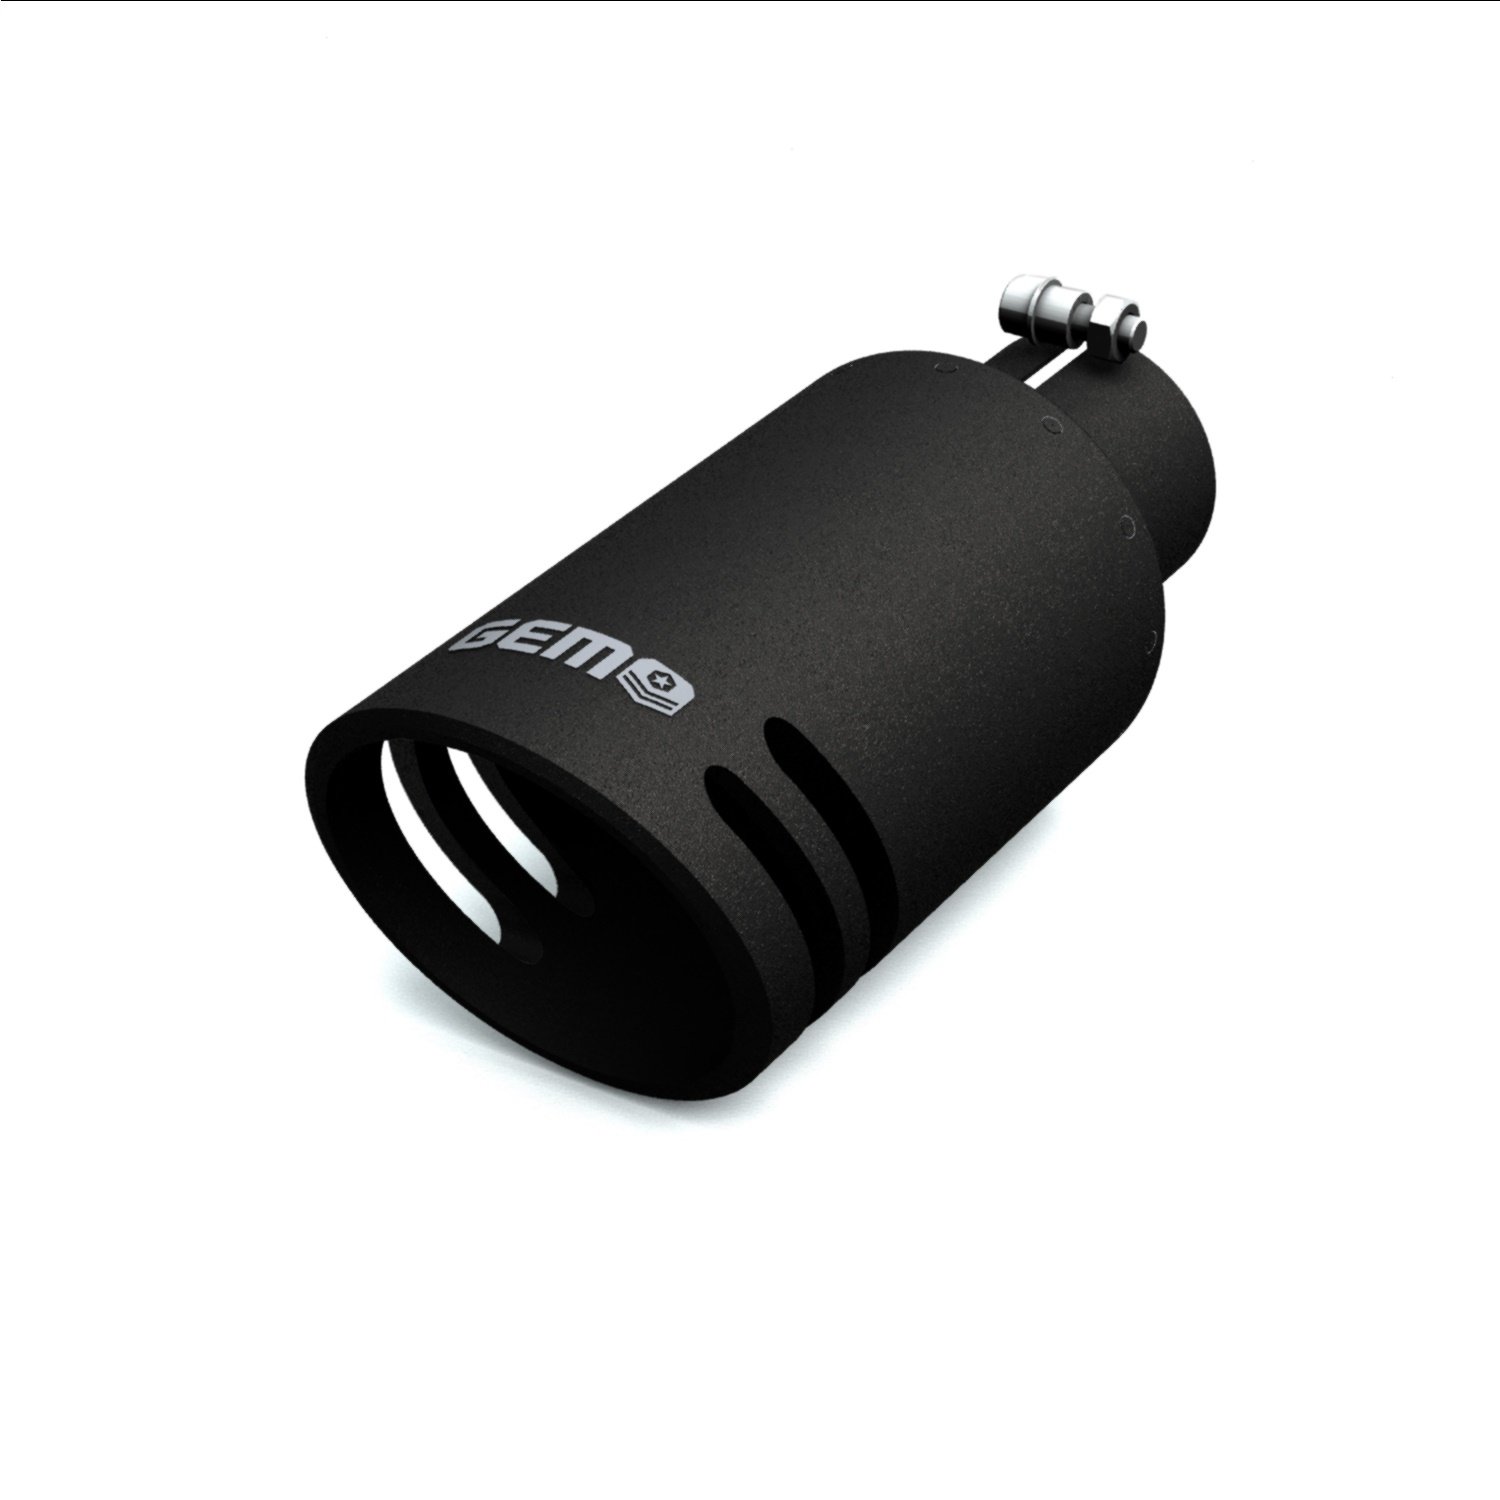 GEM Billet Exhaust Tip, 2.5 in. Inlet/5 in. Outlet x 12 in. Length, Aluminum/304 Stainless Steel, SILENCER Cut [Black Finish]